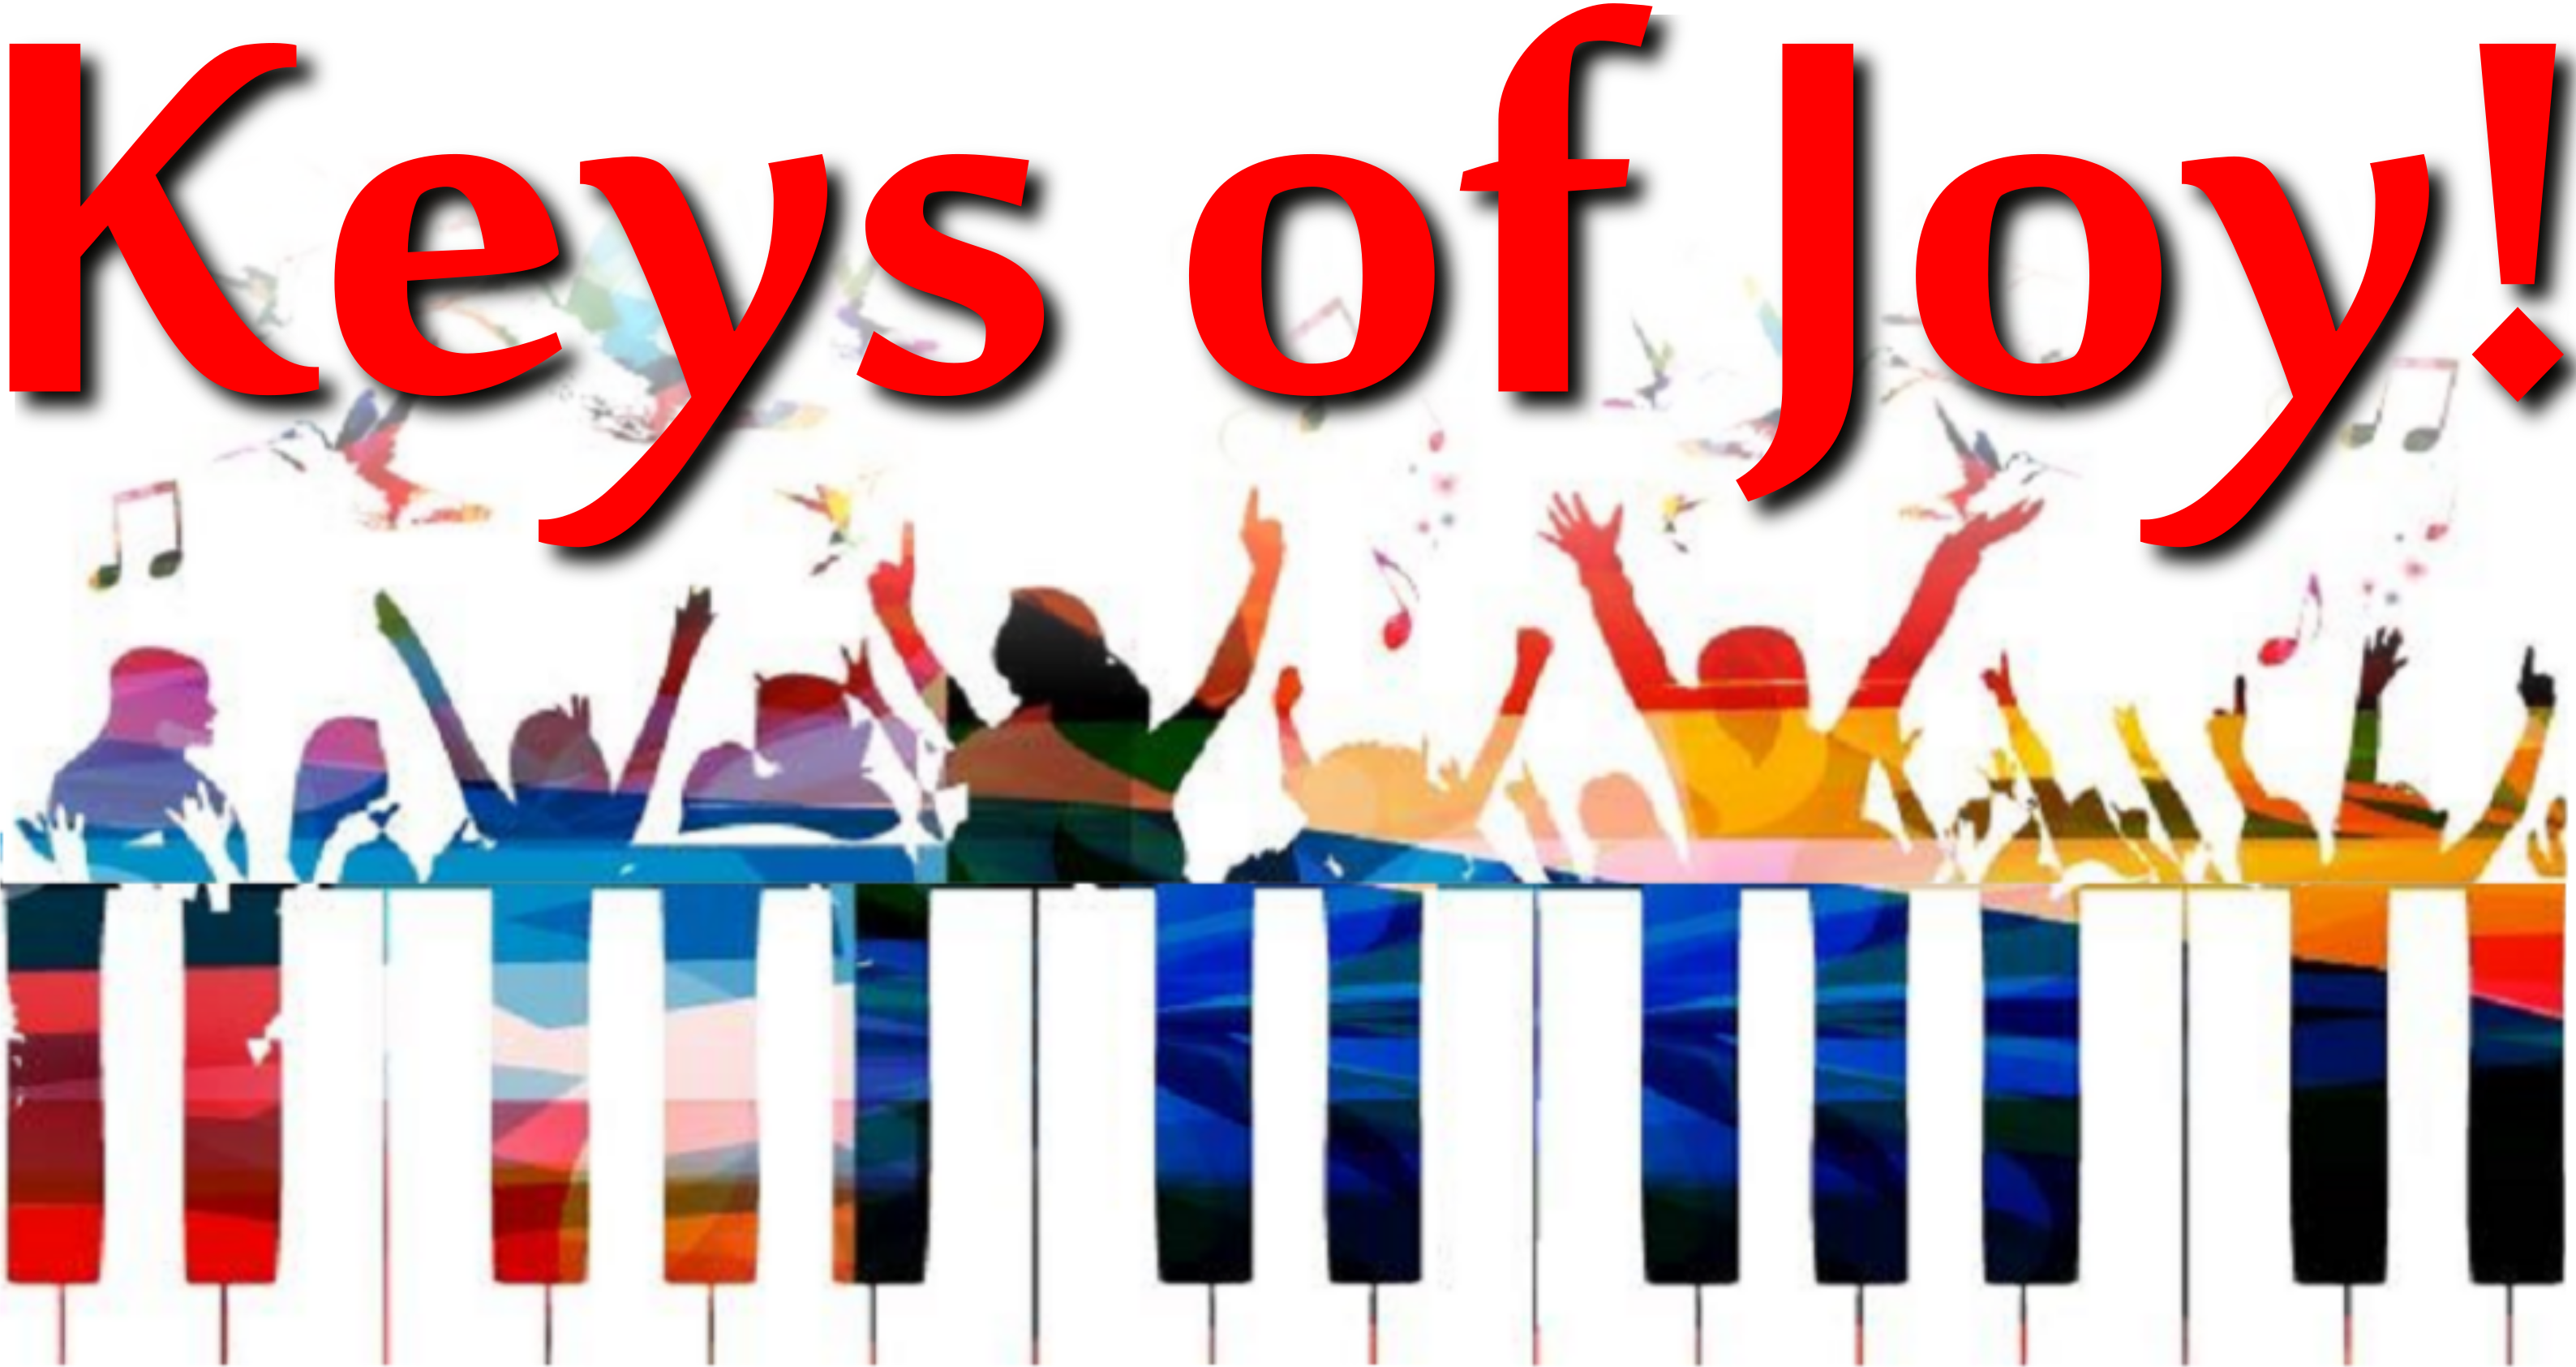 FREE Introductory Session at Keys of Joy!